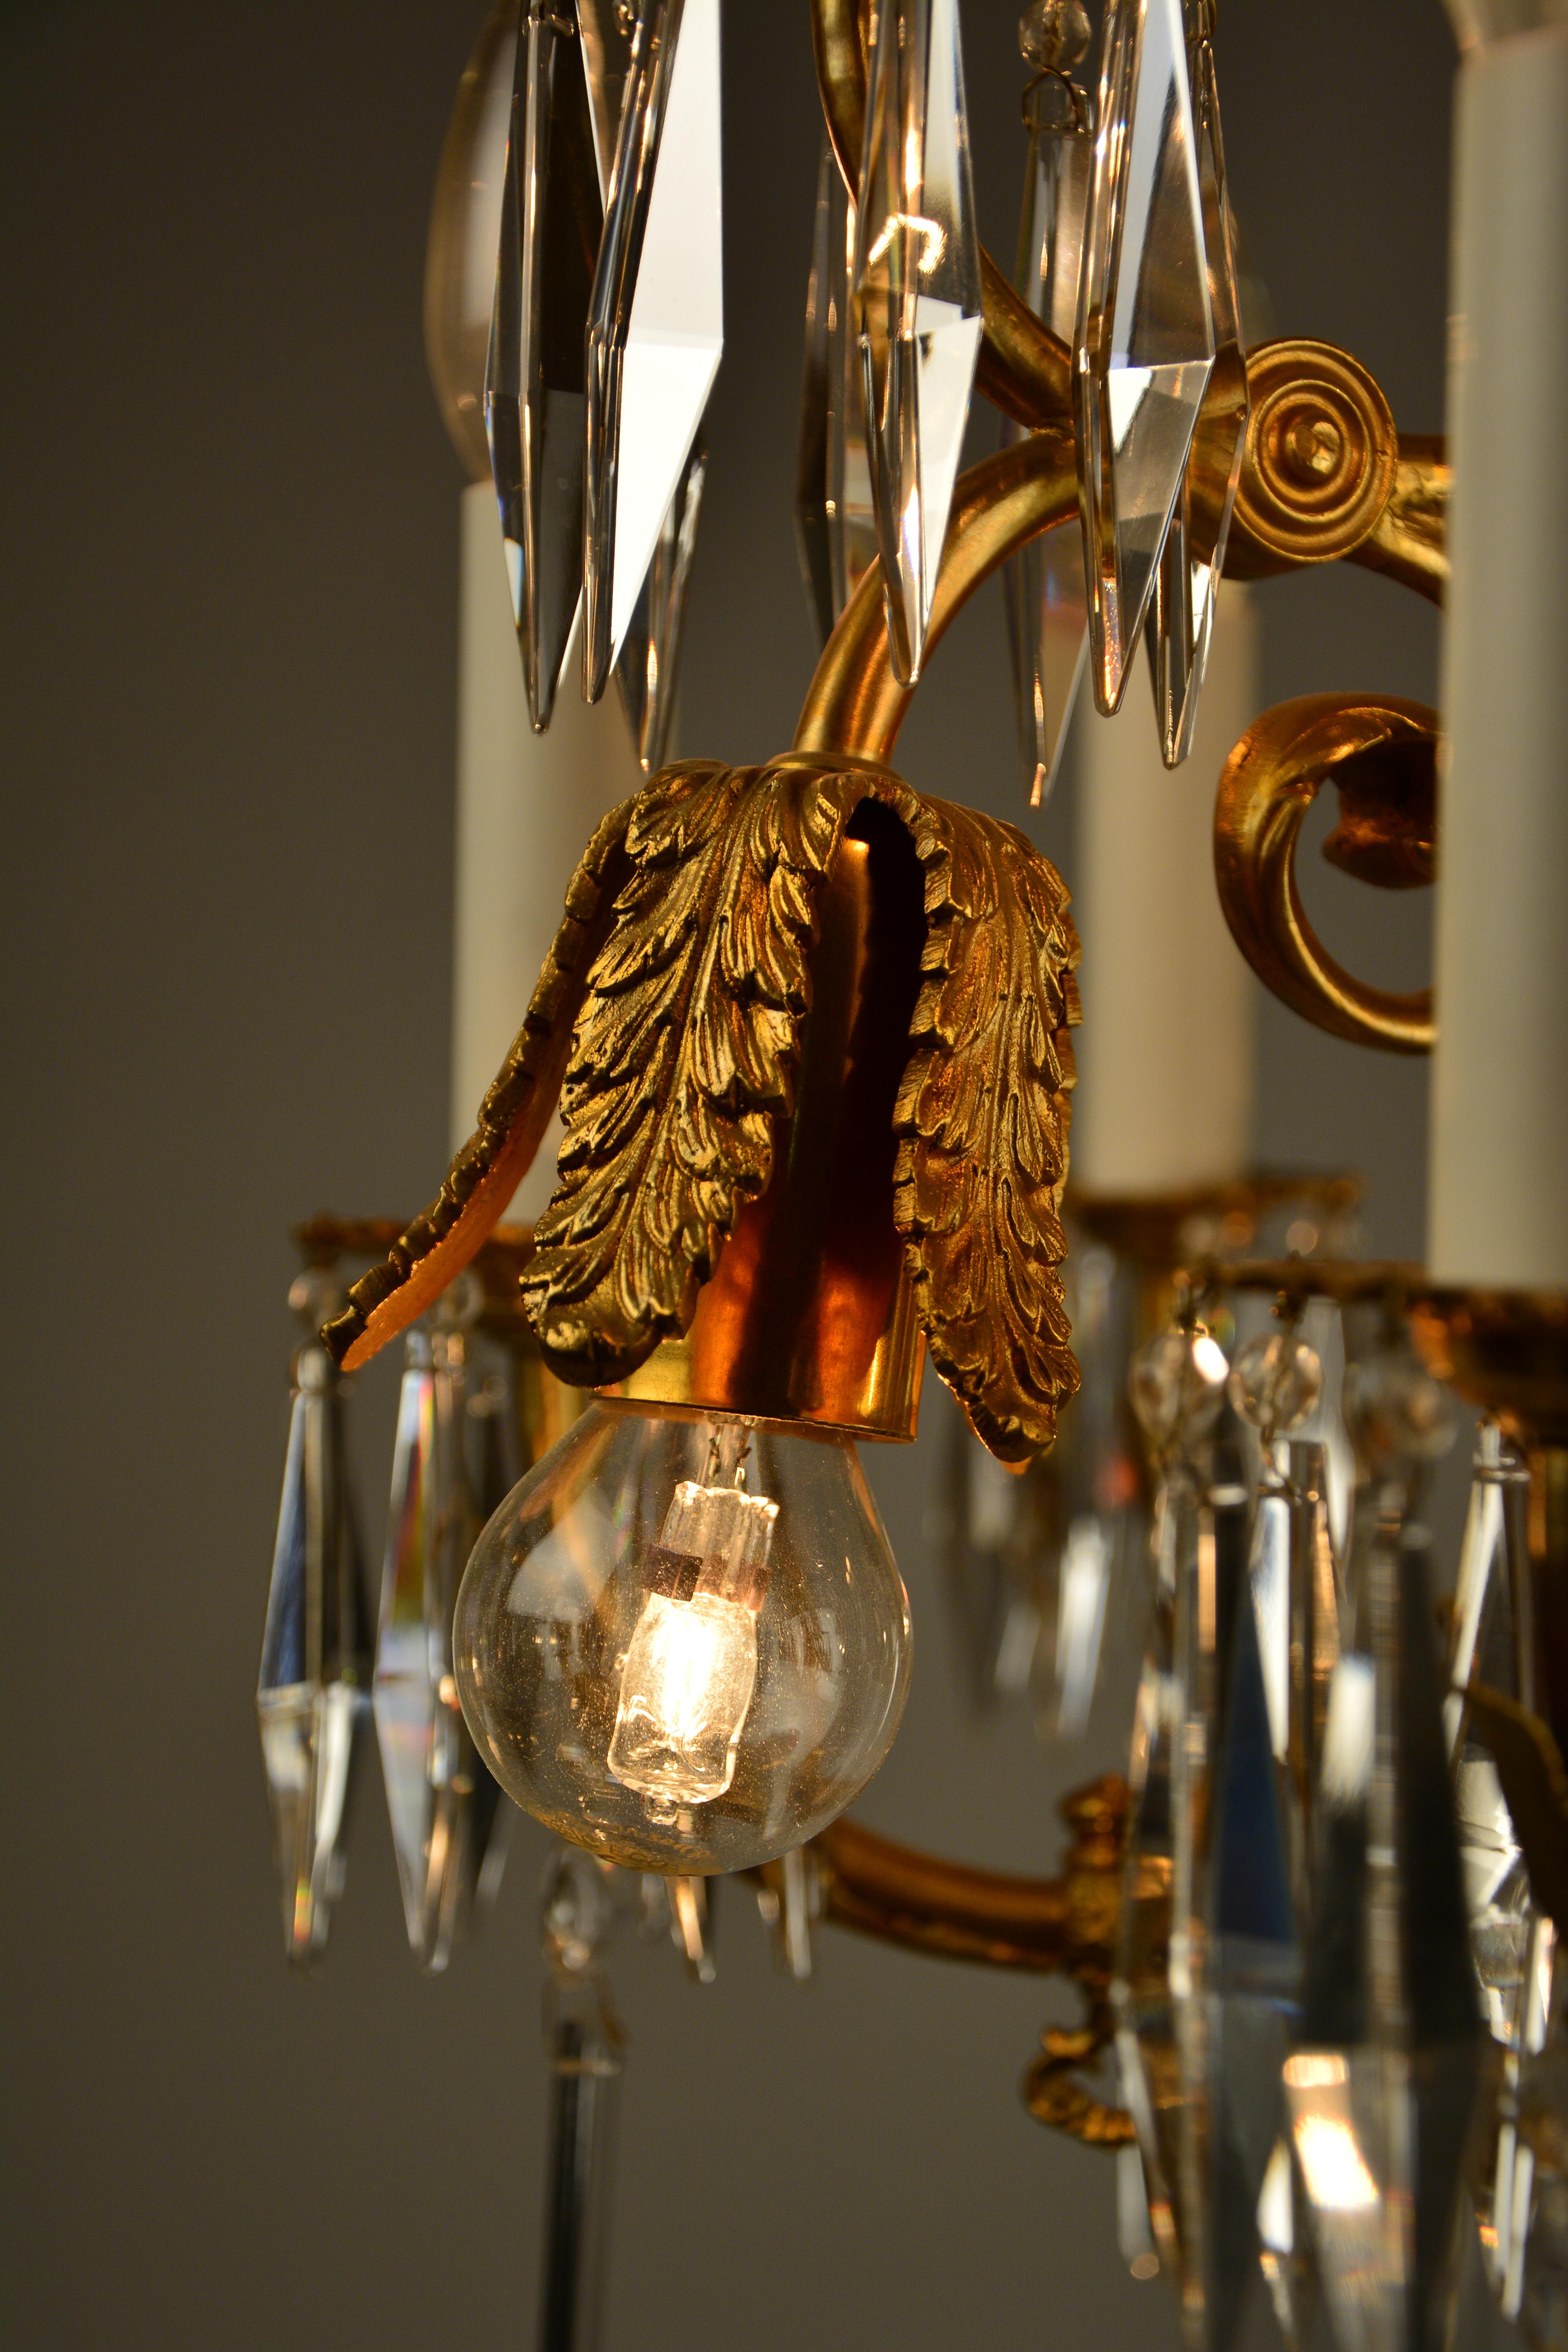 This chandelier from circa 1880-1890 is a former gas light chandelier in the style of Lobmeyr's typical style of the late 19th century. It has 6 plus 3 candle lights and 3 downward lights under a cast brass leaf design. The item still has the